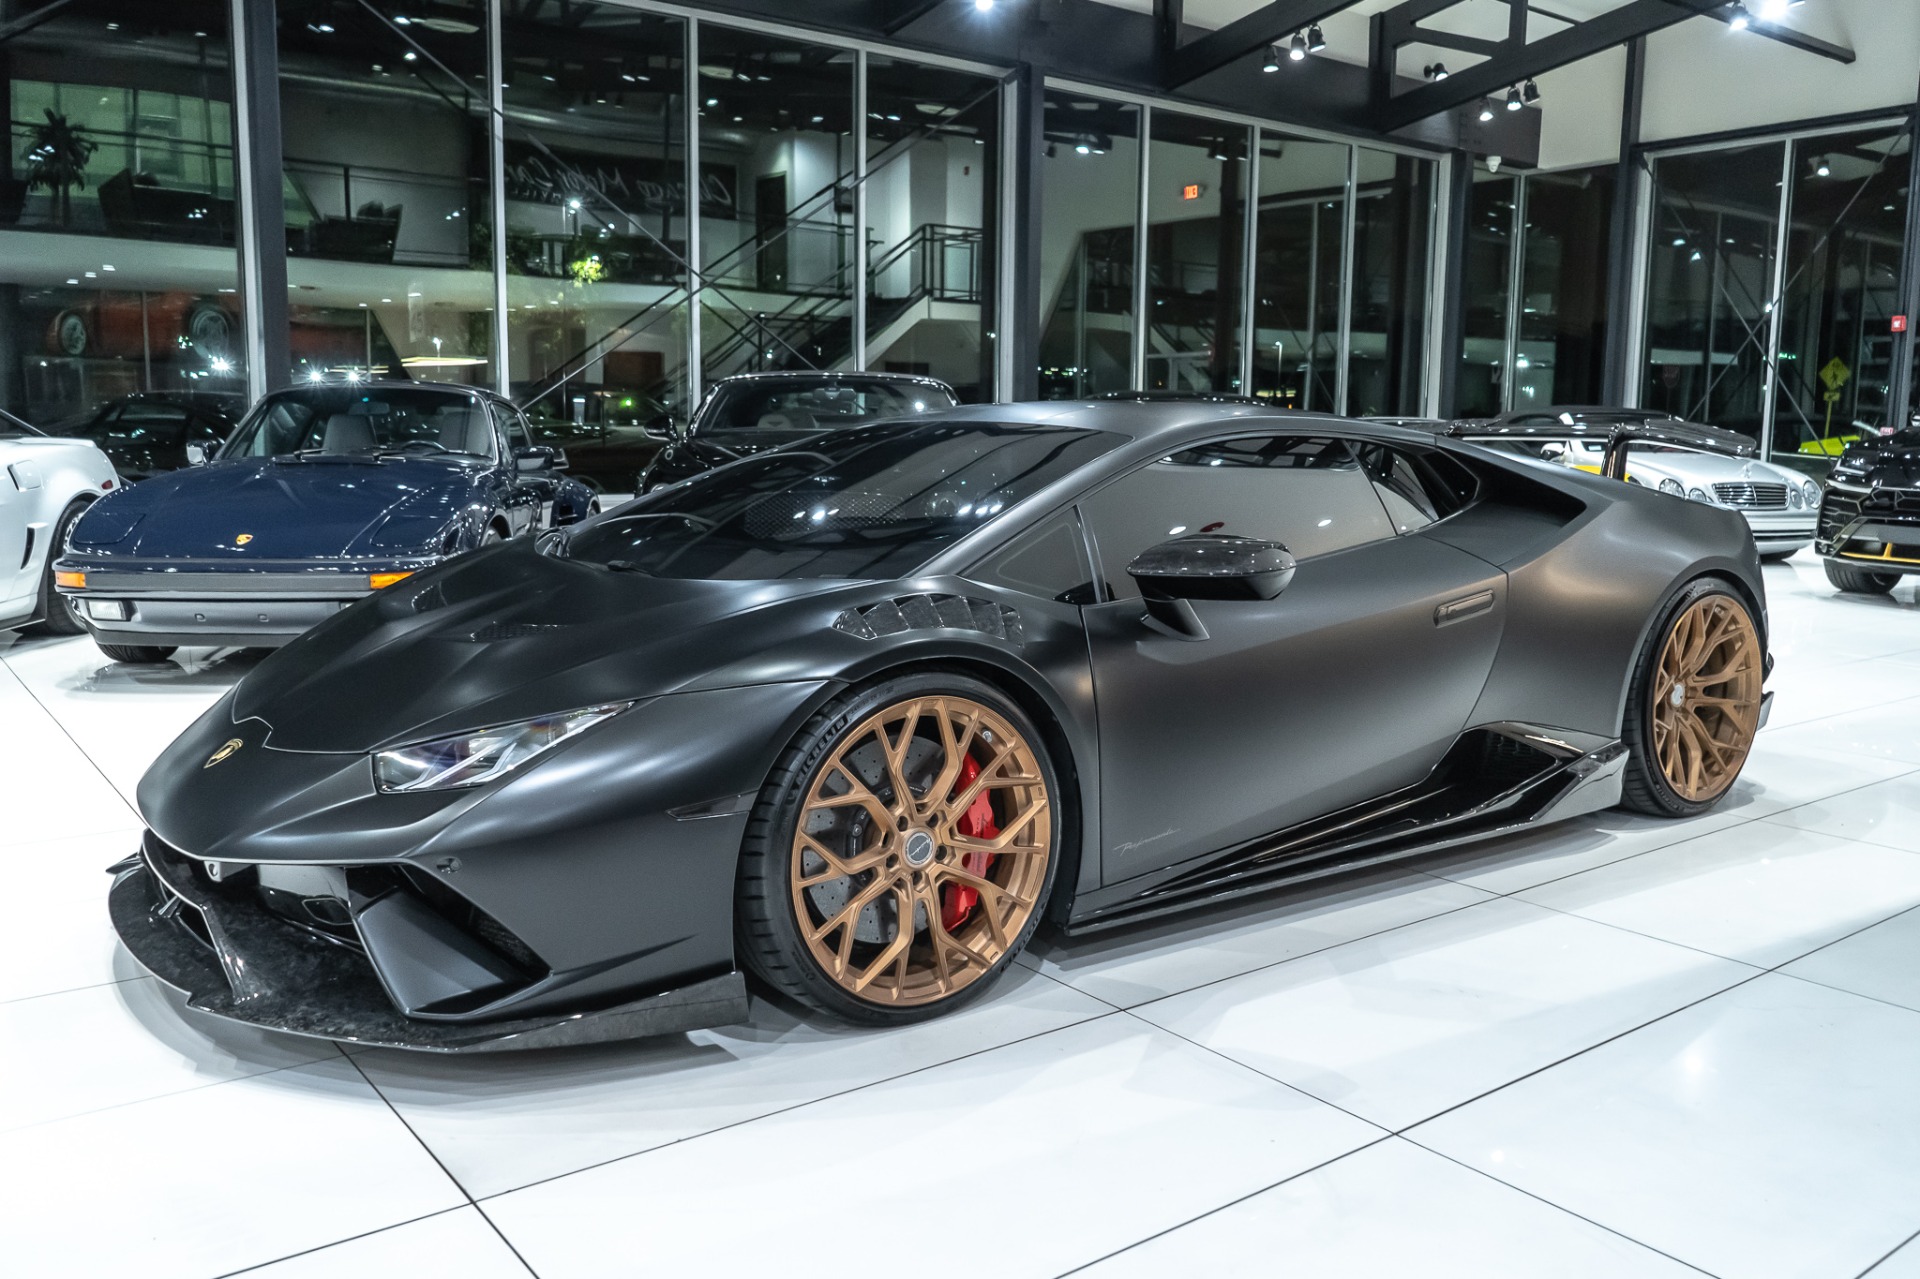 Used-2018-Lamborghini-Huracan-LP640-4-Performante-VF-Supercharged-Forged-Carbon-1016-Industries-Exterior